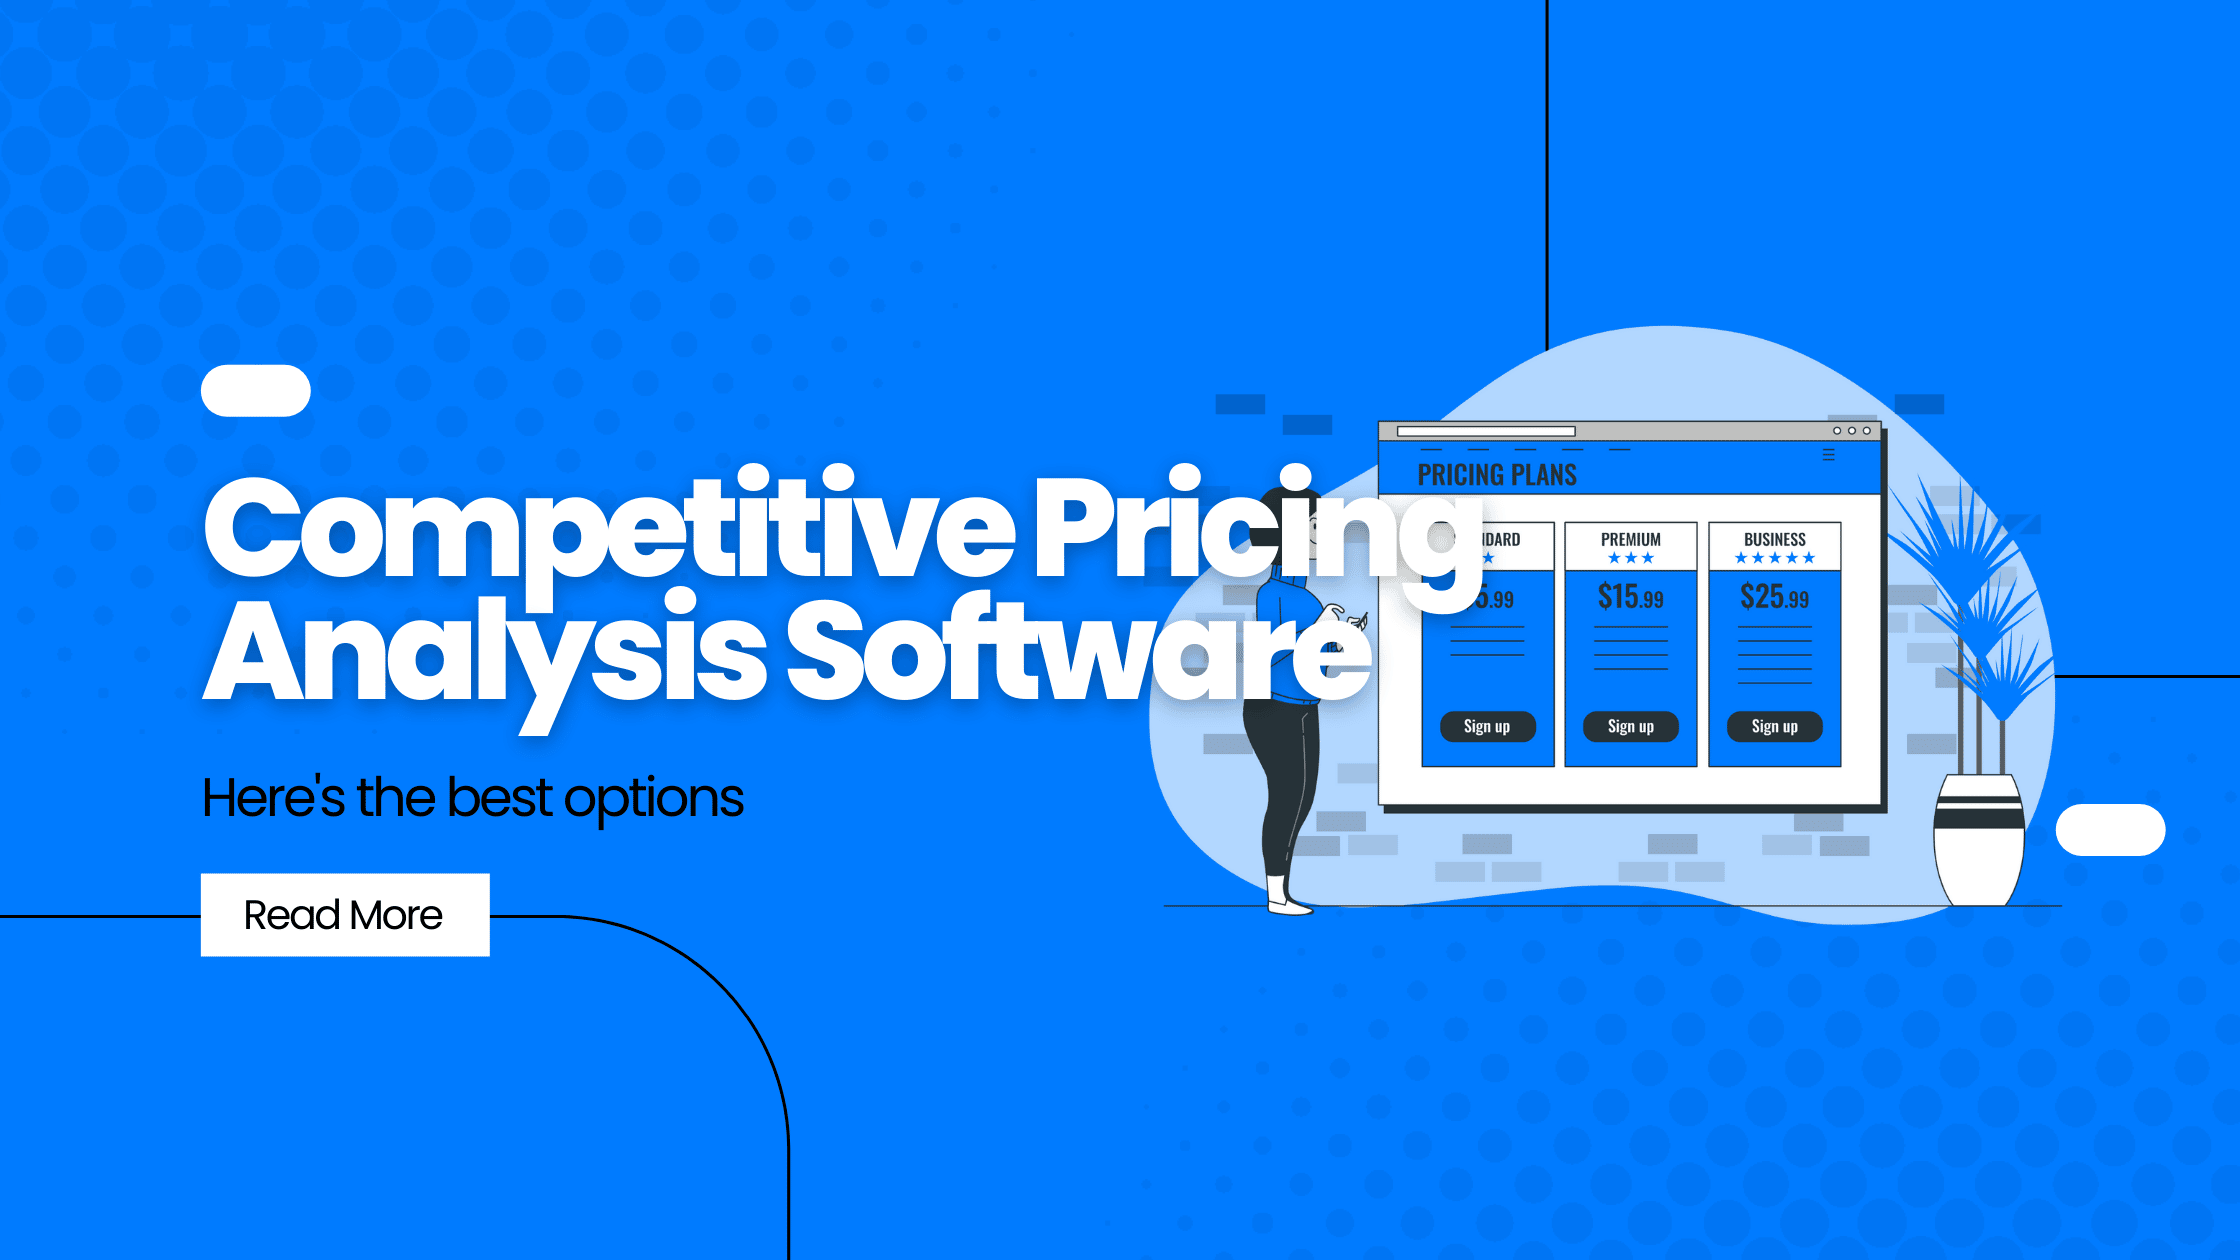 Competitive Pricing Analysis Software